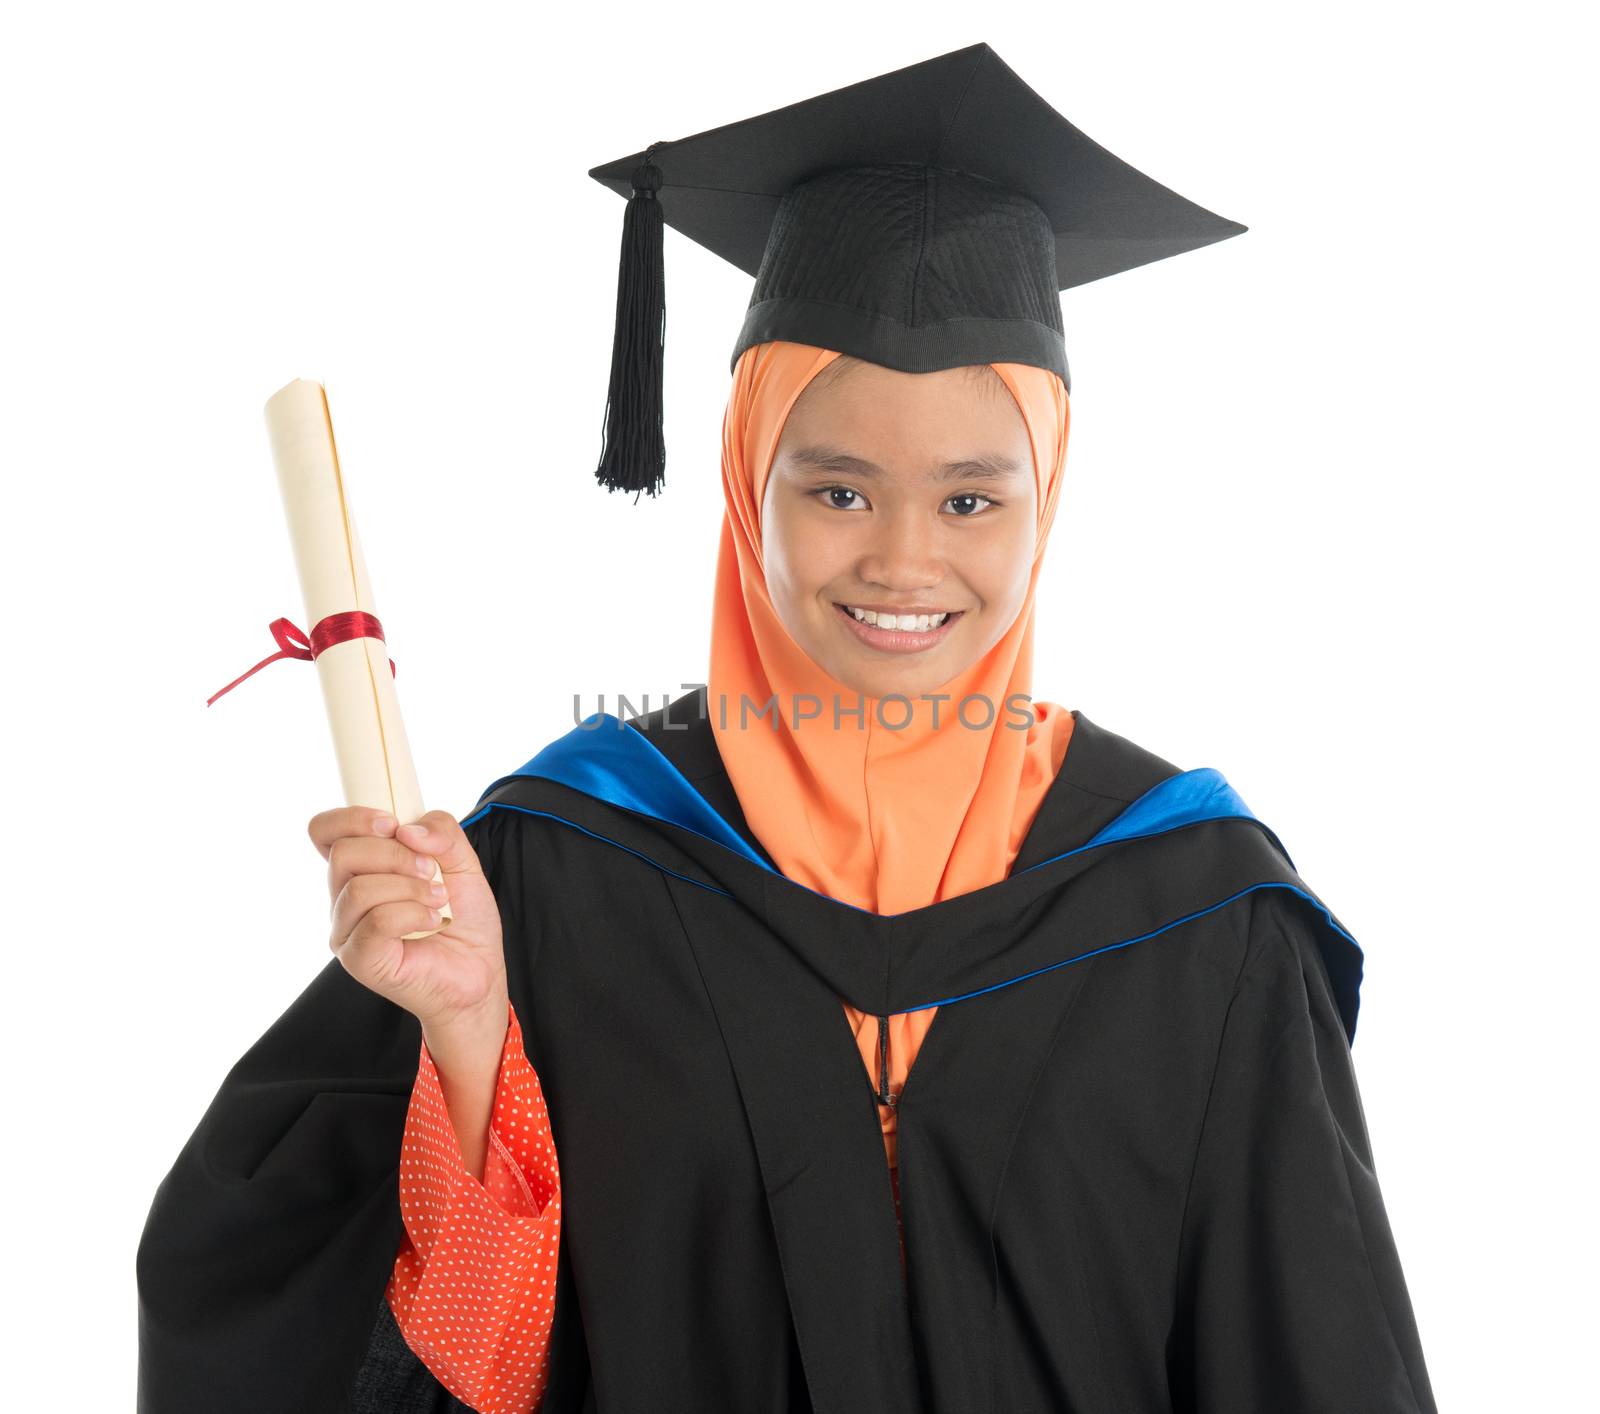 Female student in graduation gown, standing isolated white background.